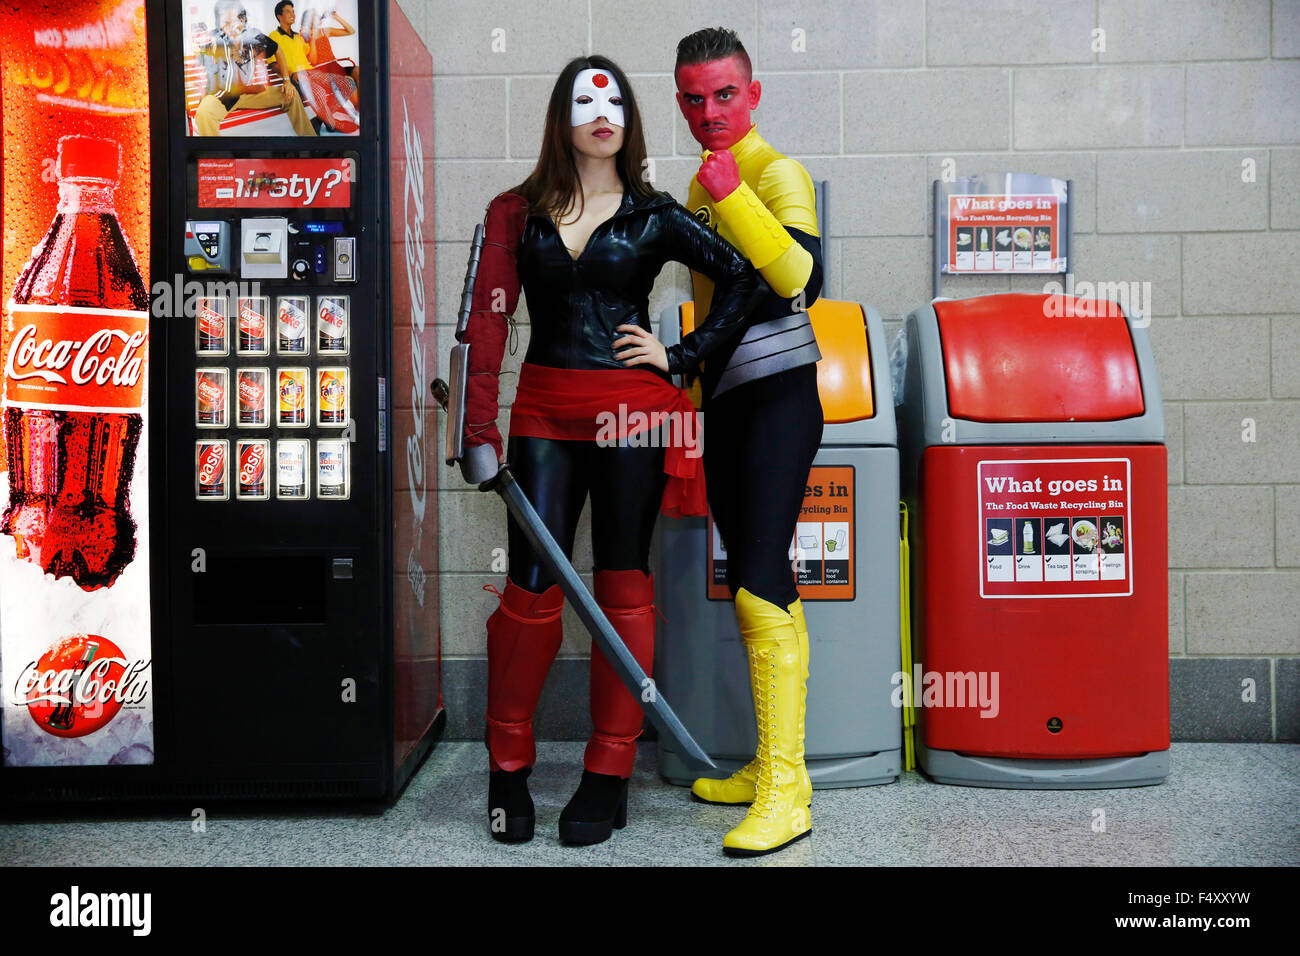 London, UK. 23rd Oct, 2015. Jack Cox and Susi Ranson pose as Sinestro and Katana from DC comics, during the 28th MCM London Comic Con at ExCeL in east London UK Friday October 23, 2015. Credit:  Luke MacGregor/Alamy Live News Stock Photo